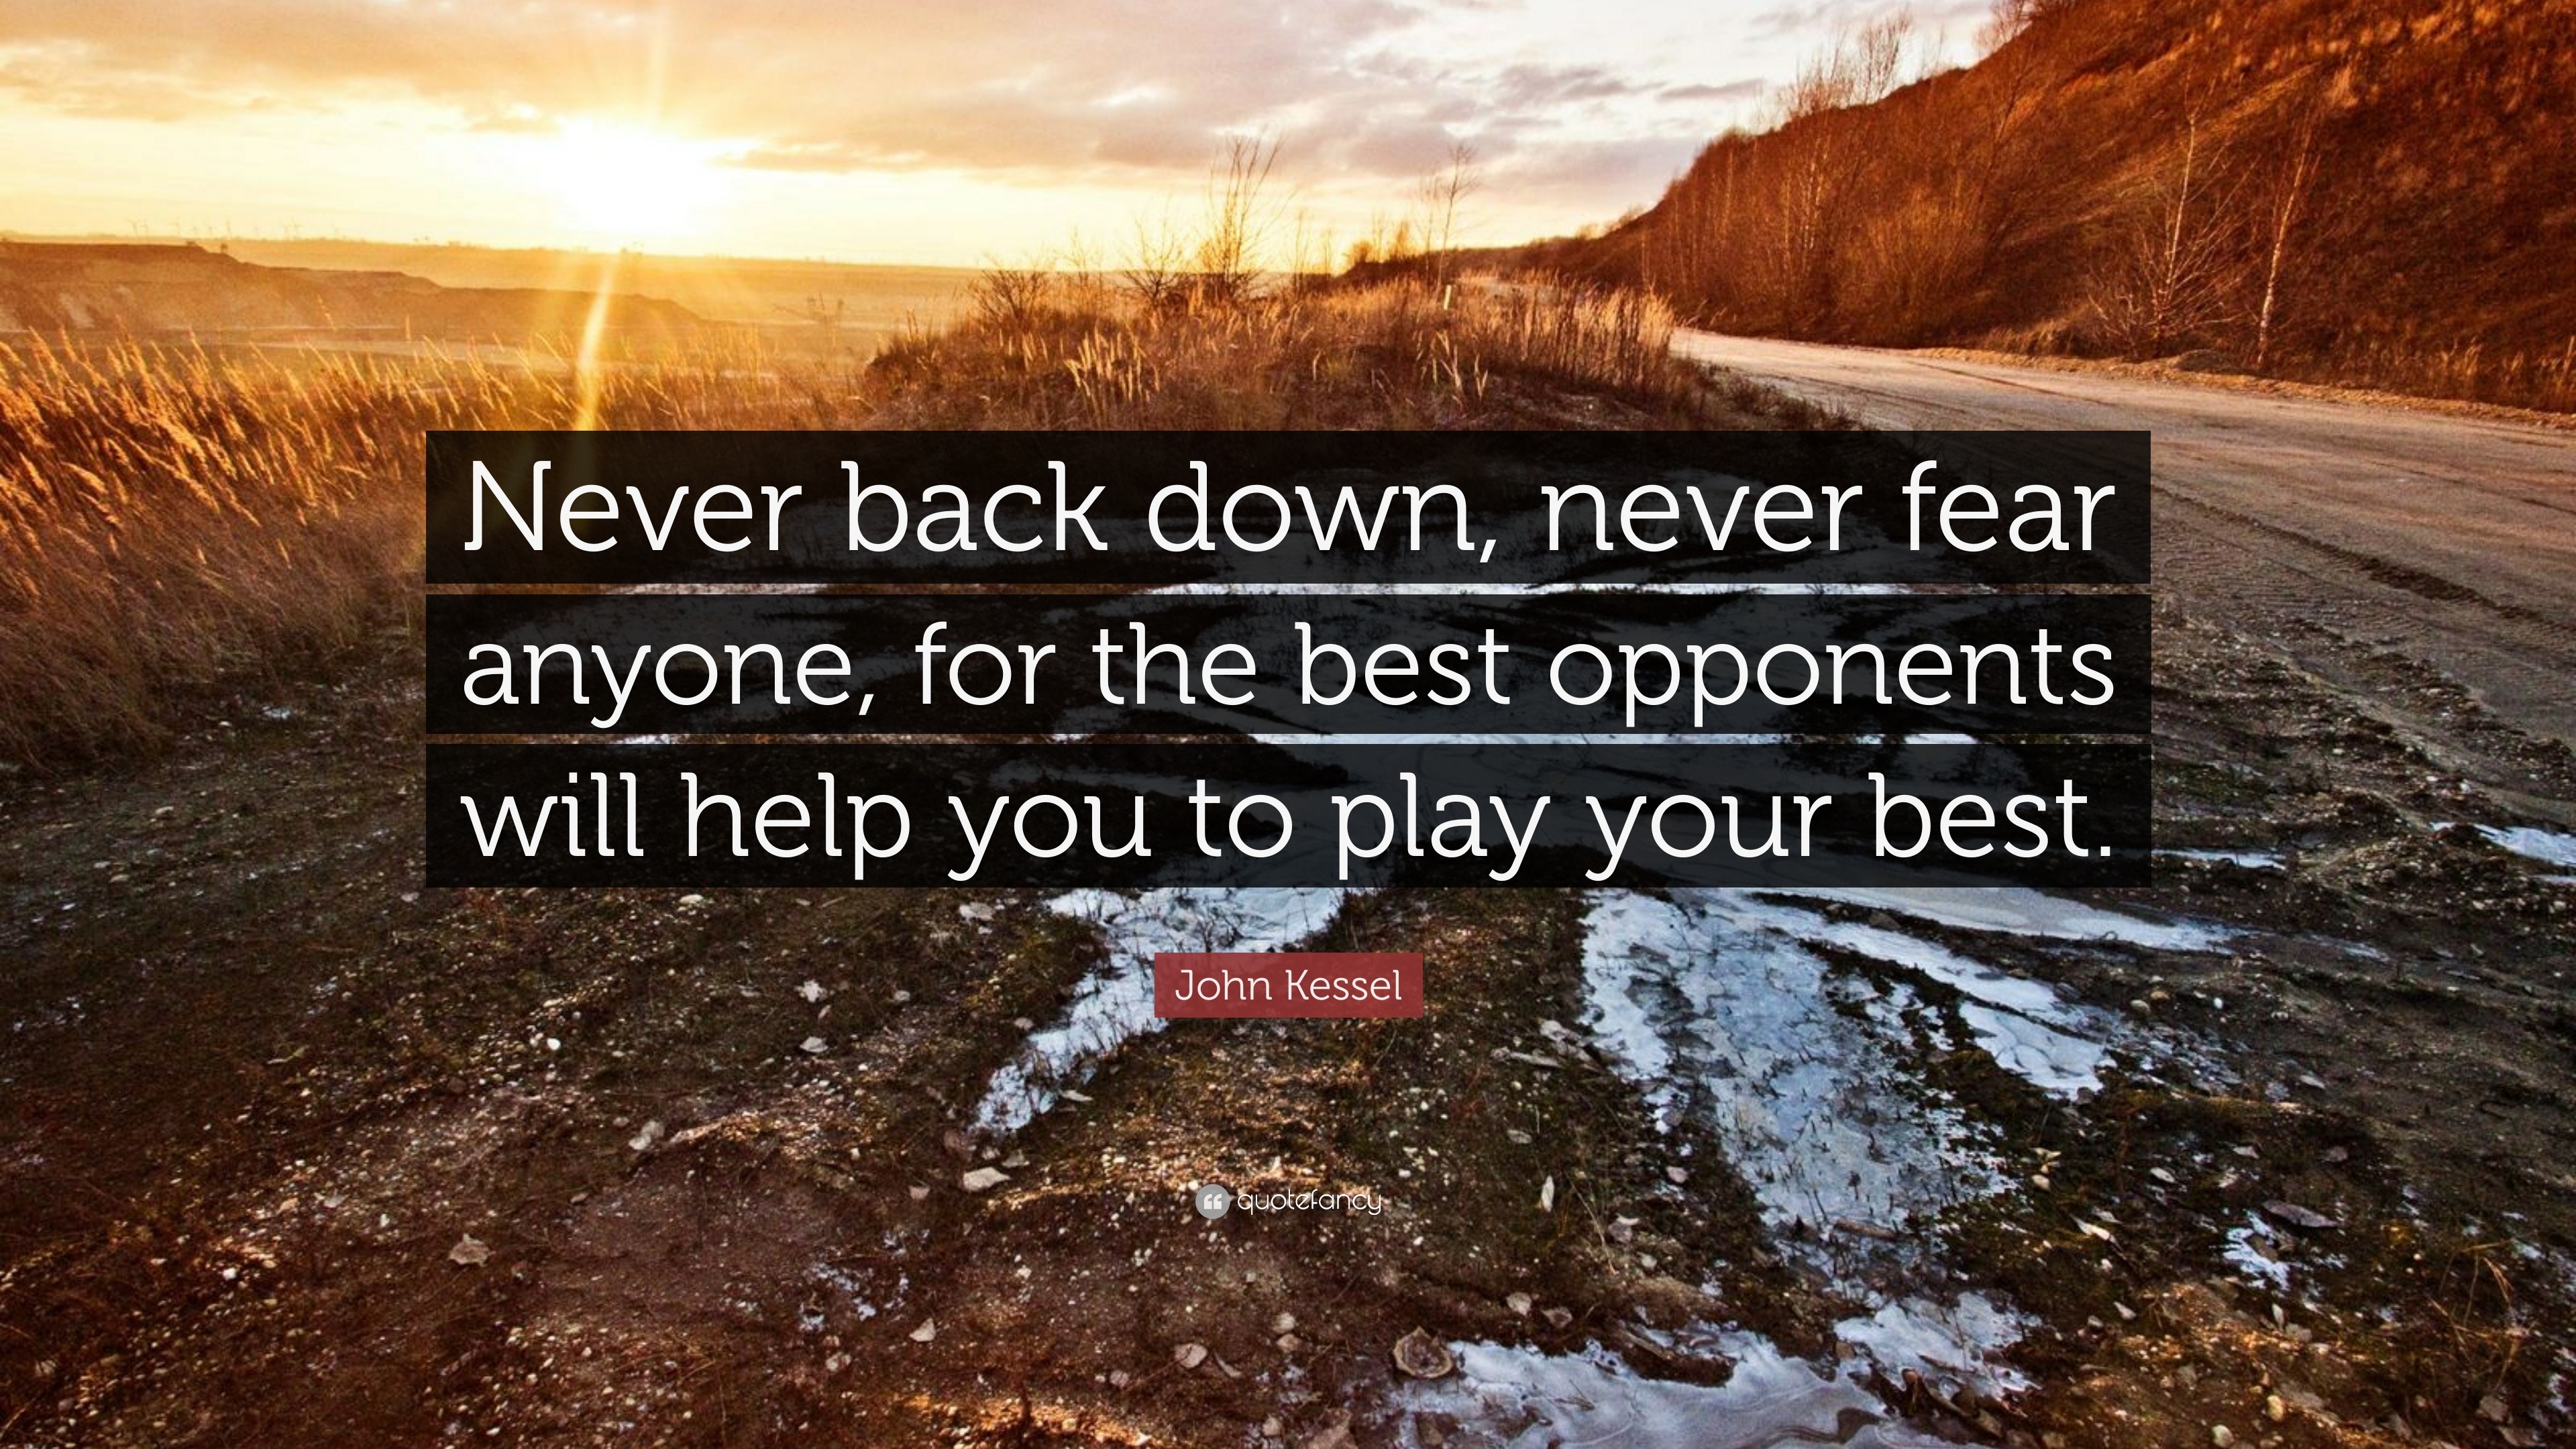 John Kessel Quote: “Never back down, never fear anyone, for the best